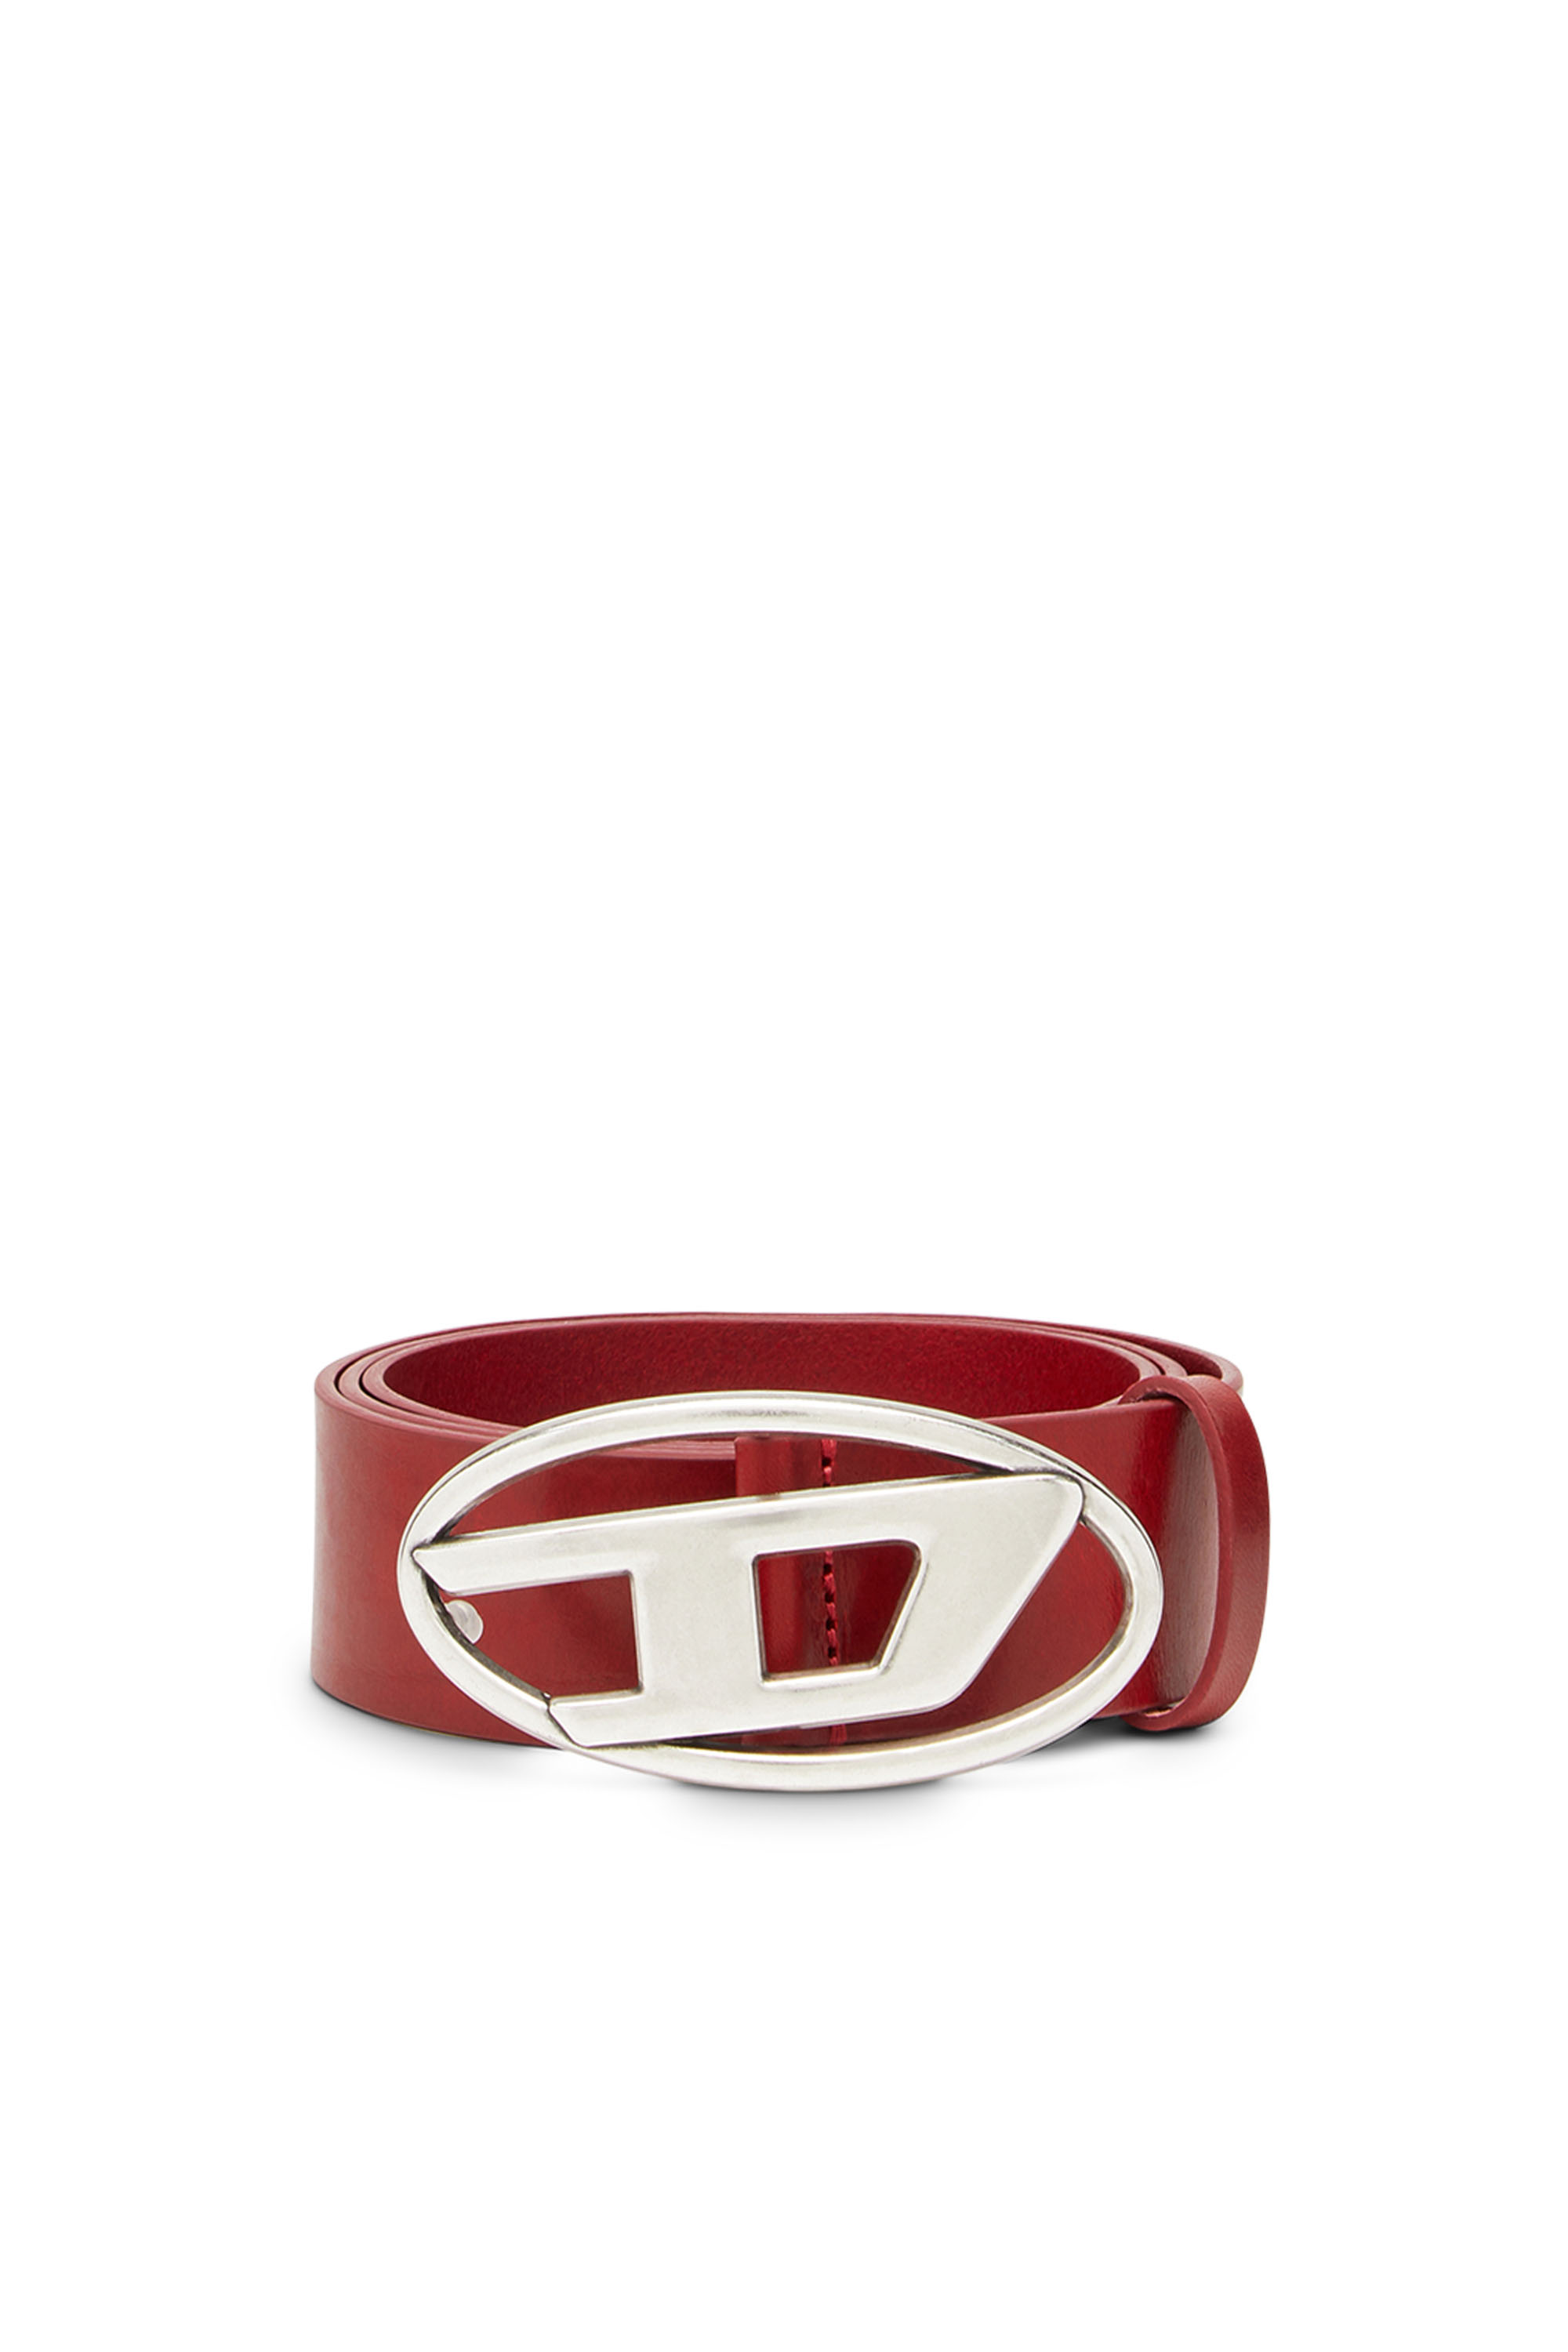 Shop Diesel Leather Belt With D Buckle In Red